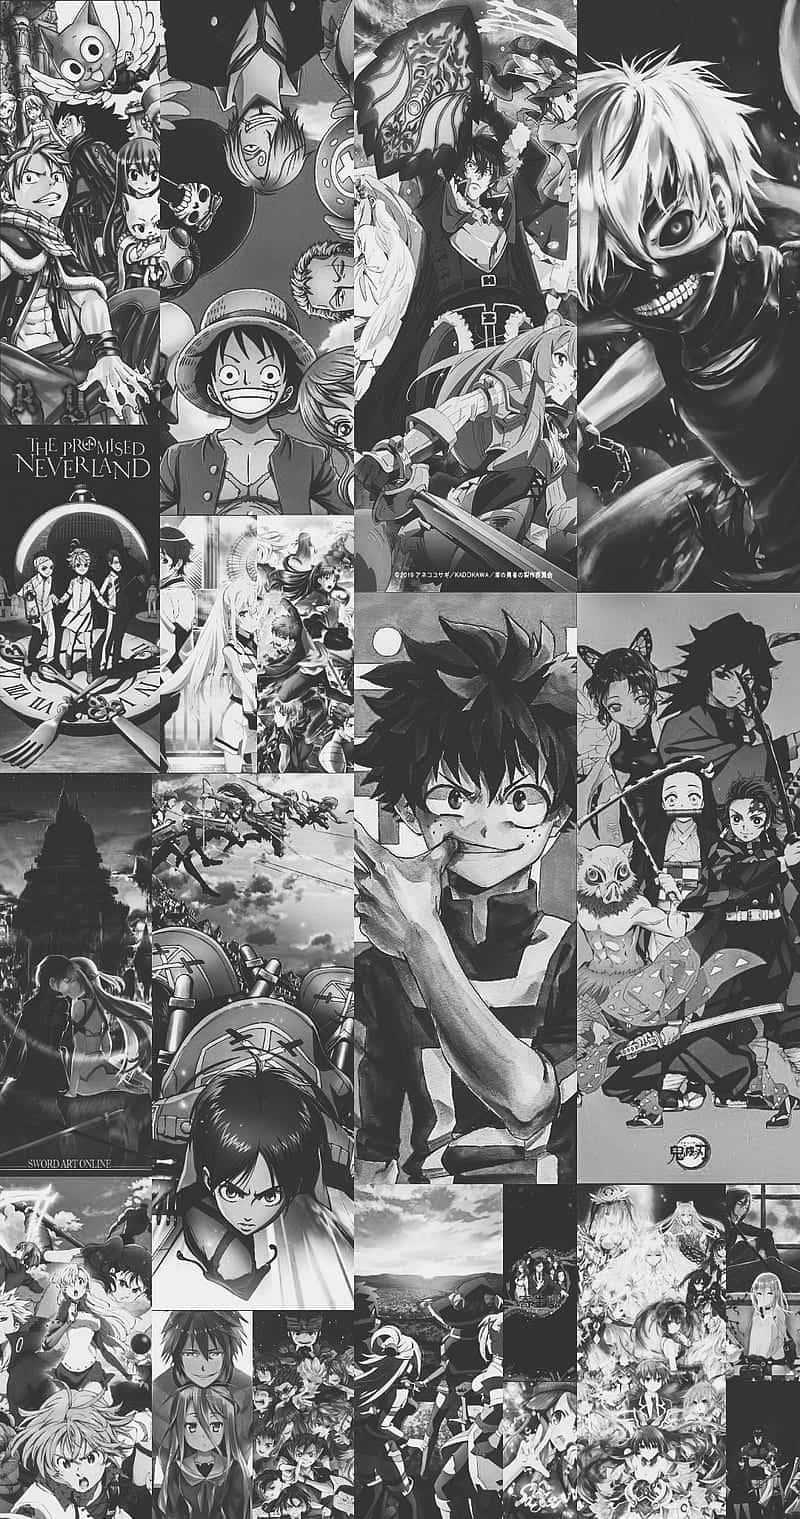 A Collage Of Anime Characters In Black And White